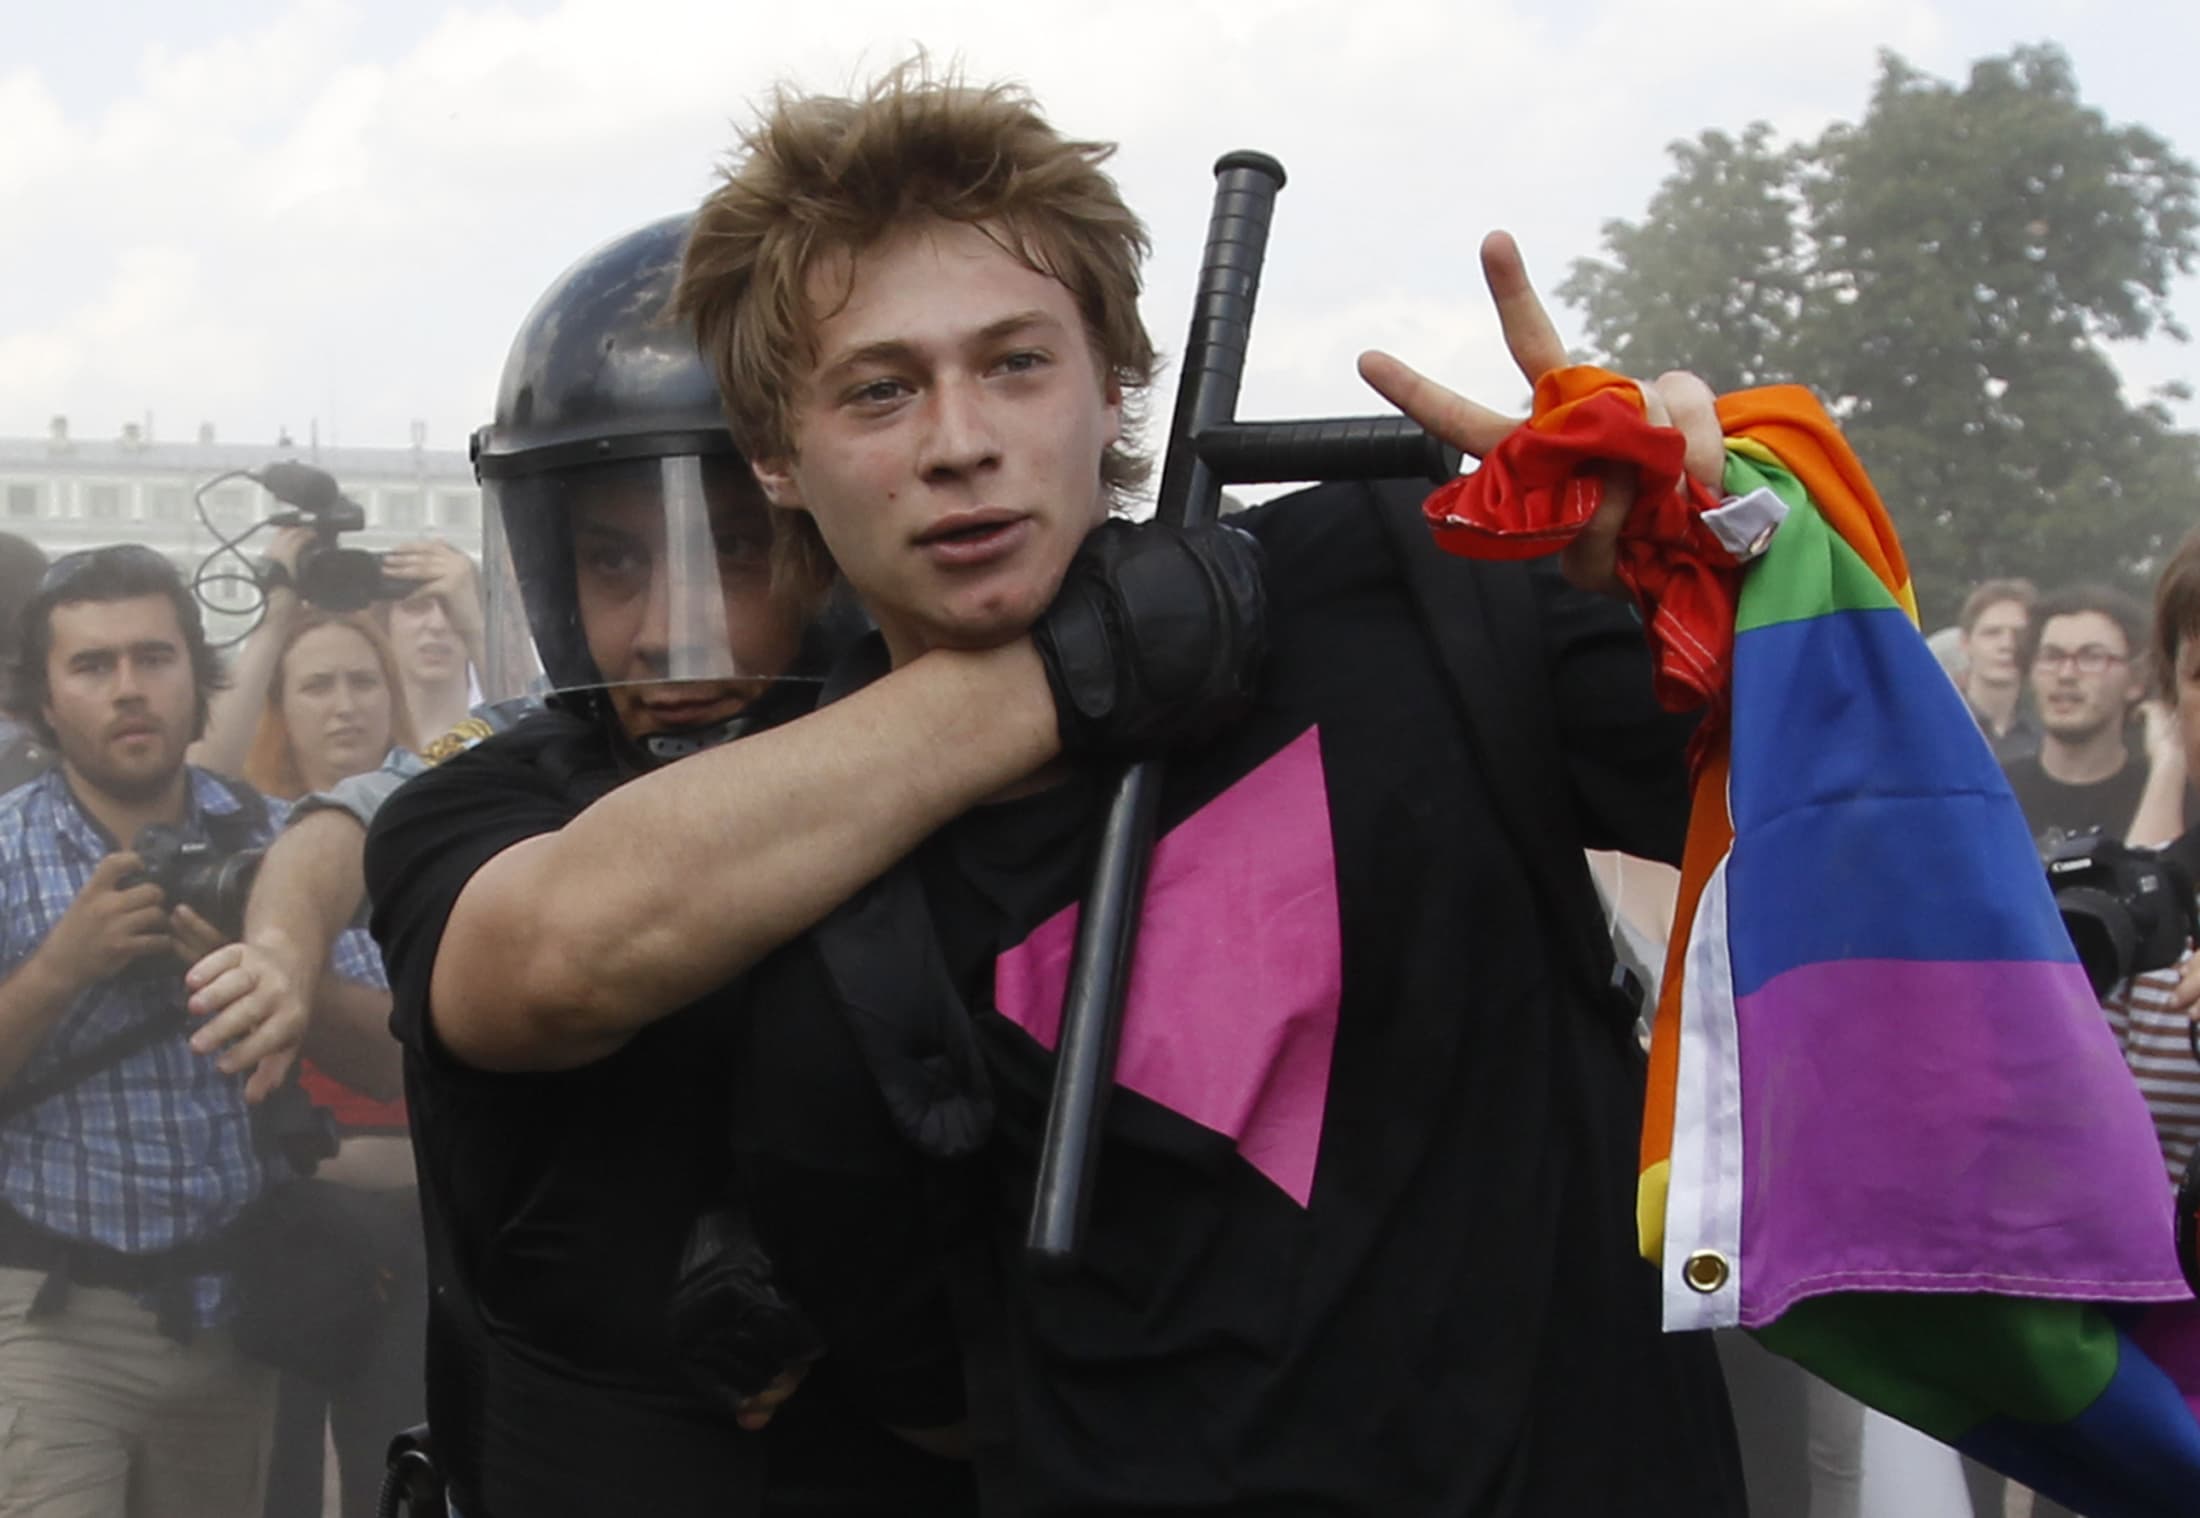 Police detain a gay rights activist during a Gay Pride event in St. Petersburg, 29 June, 2013, REUTERS/Alexander Demianchuk